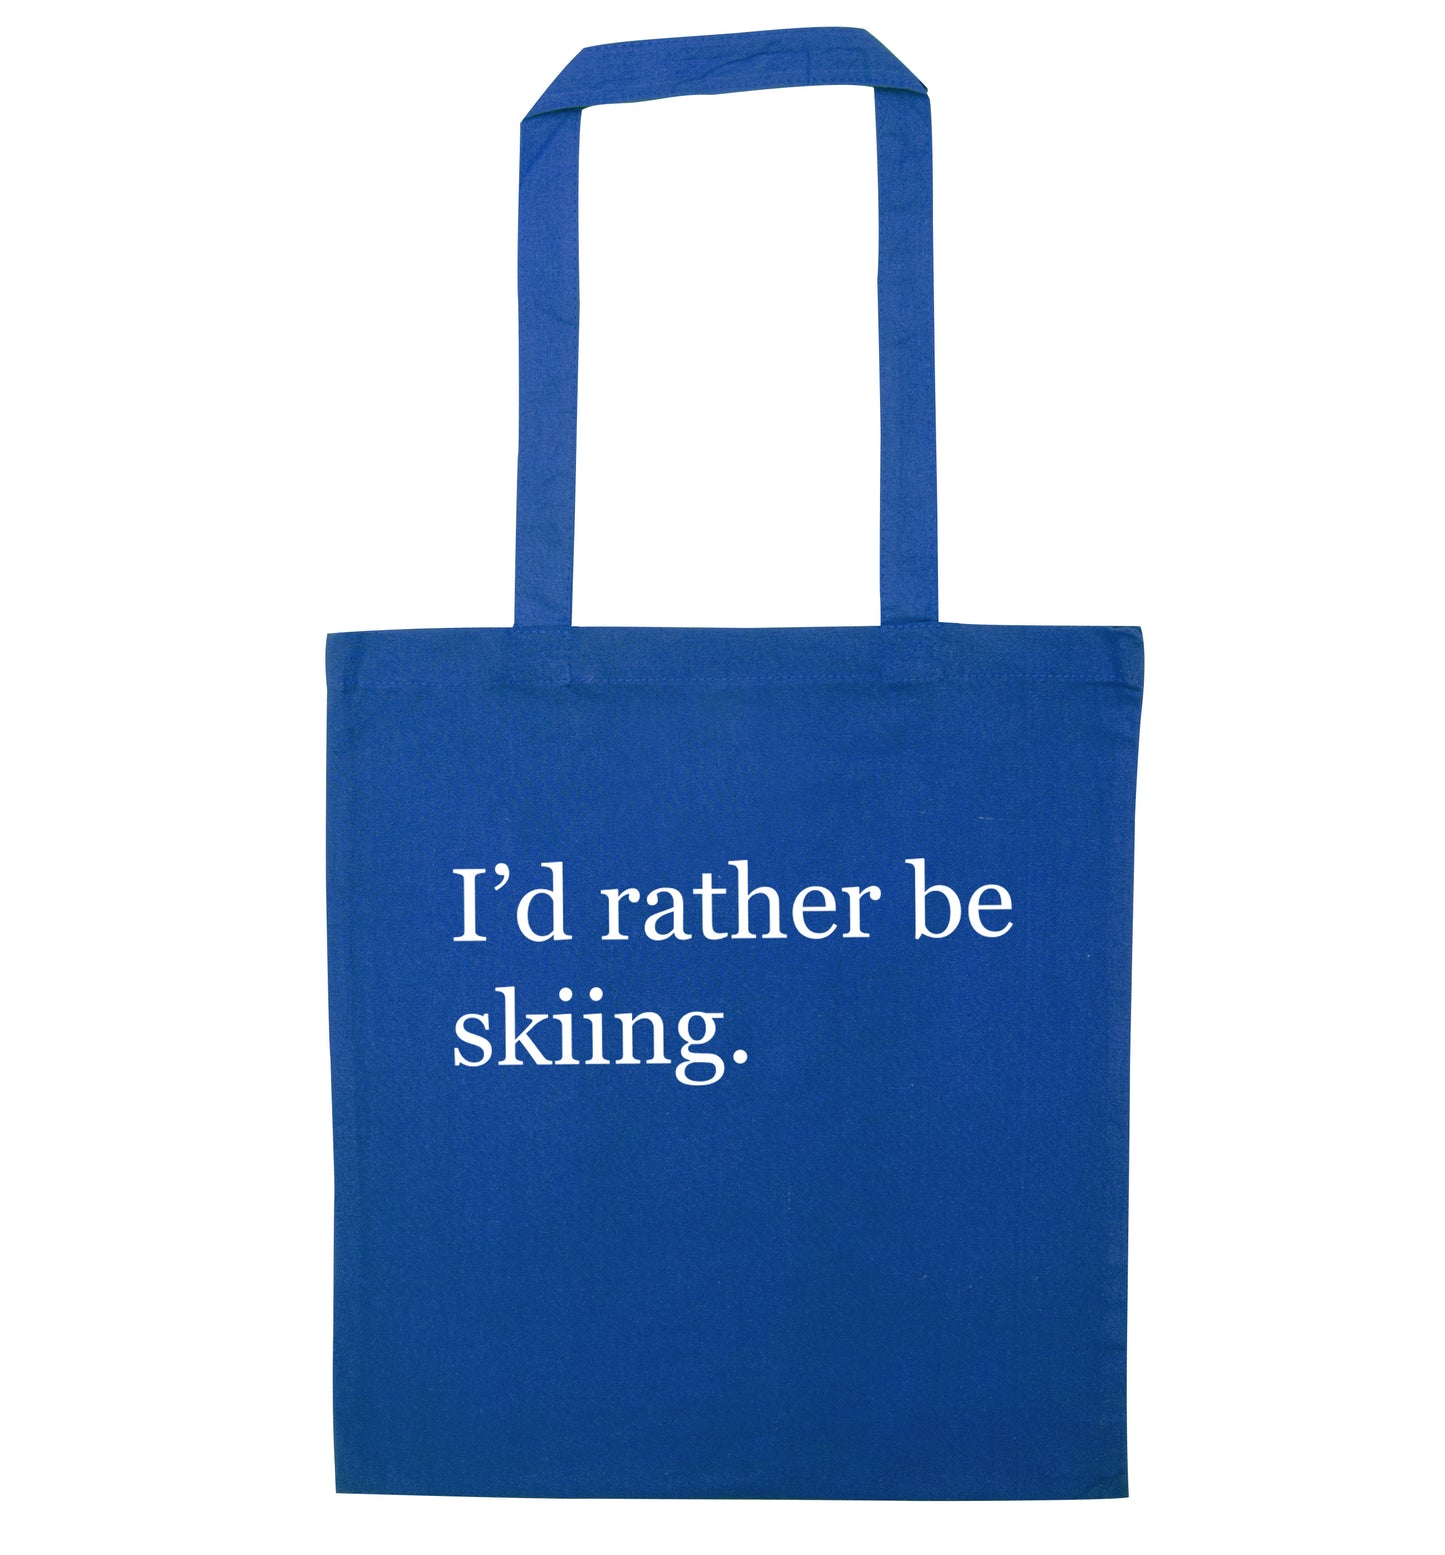 I'd rather be skiing blue tote bag